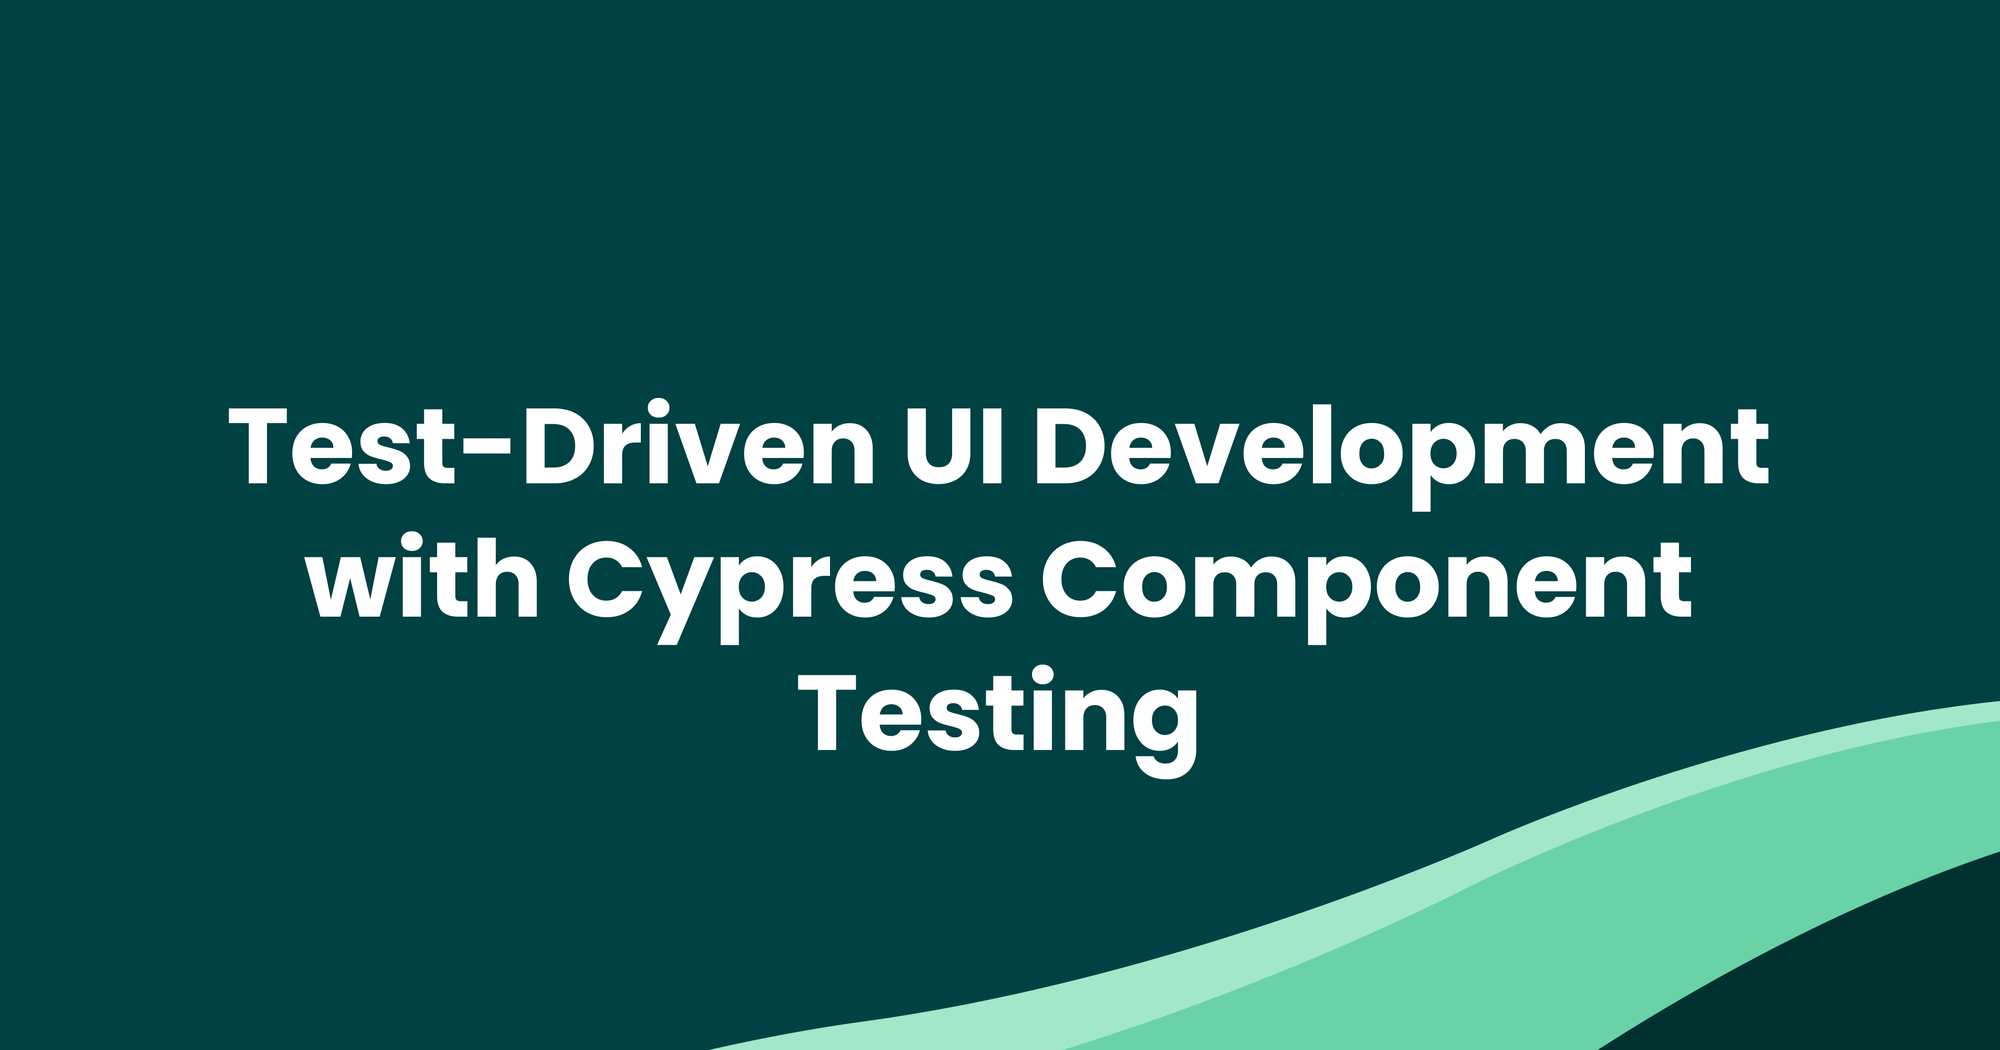 Test-Driven UI Development with Cypress Component Testing